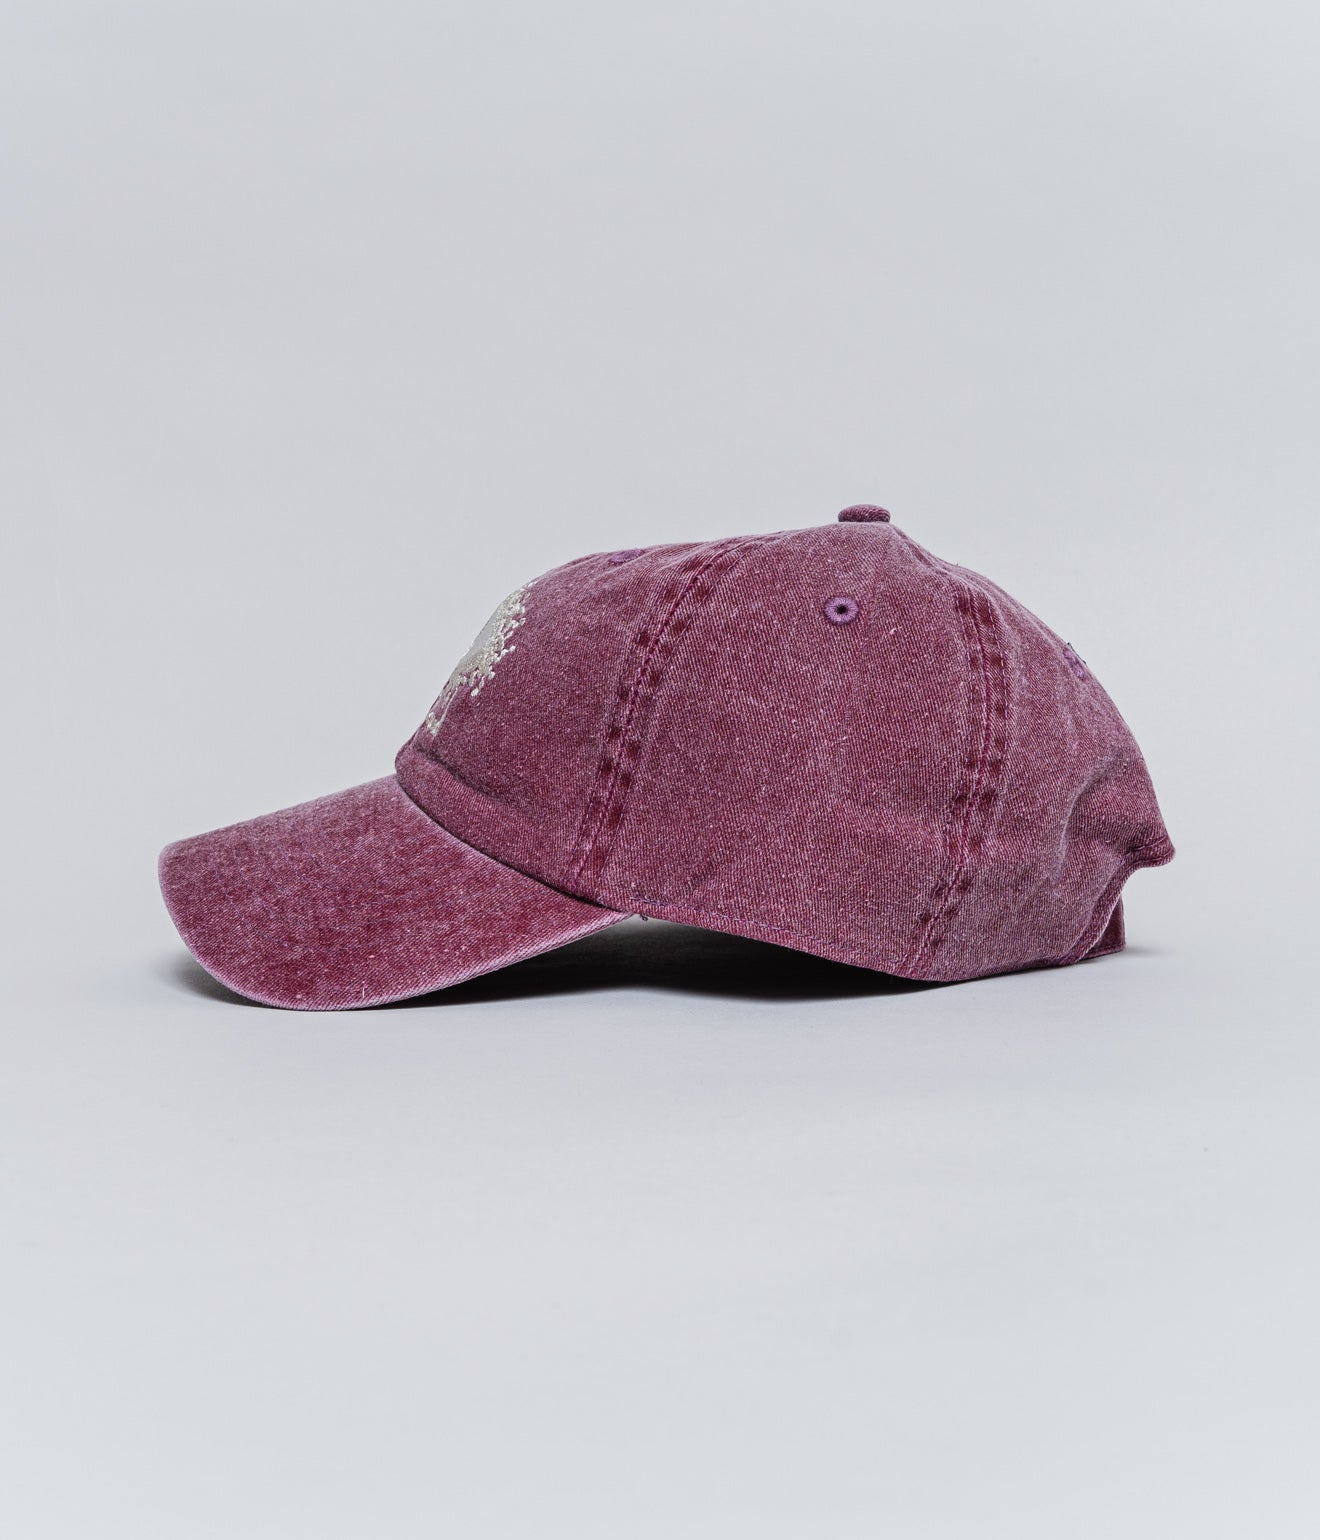 WAVE OF SAND "CAP PIGMENT DYED TWILL" BURGUNDY - WEAREALLANIMALS